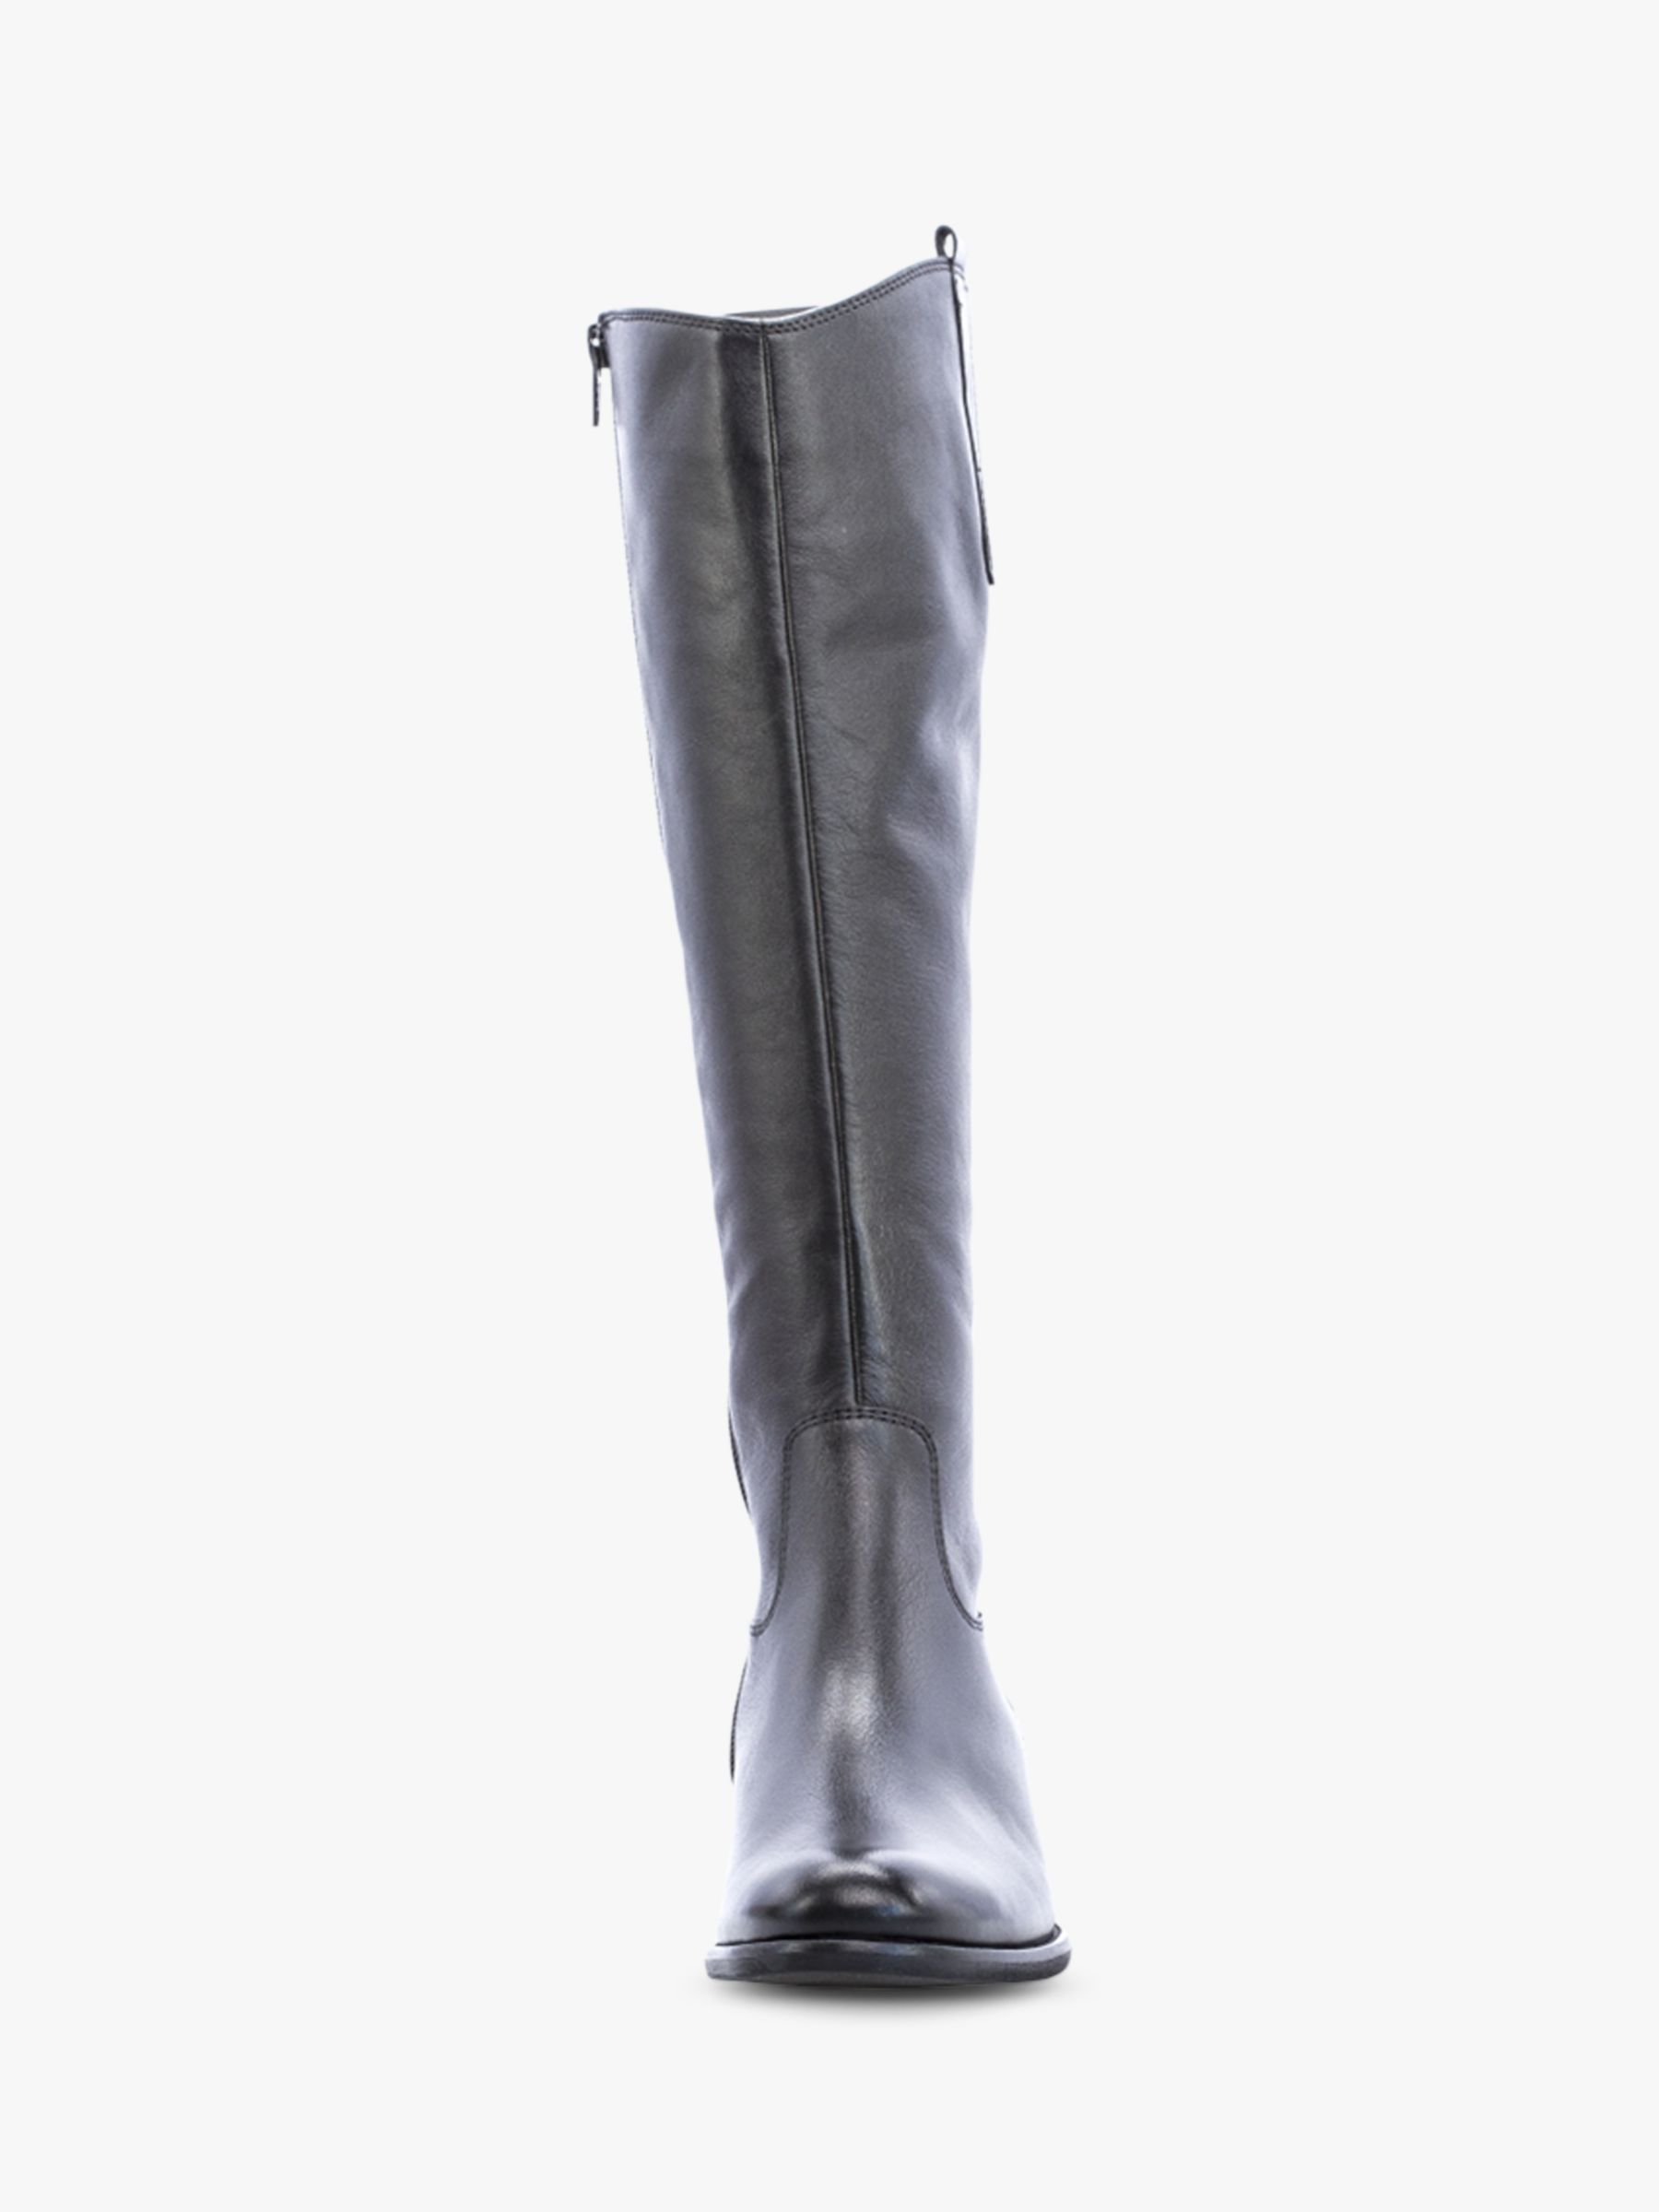 Gabor Brook Fit Leather Low Heeled Knee High Boots, Black at Lewis & Partners